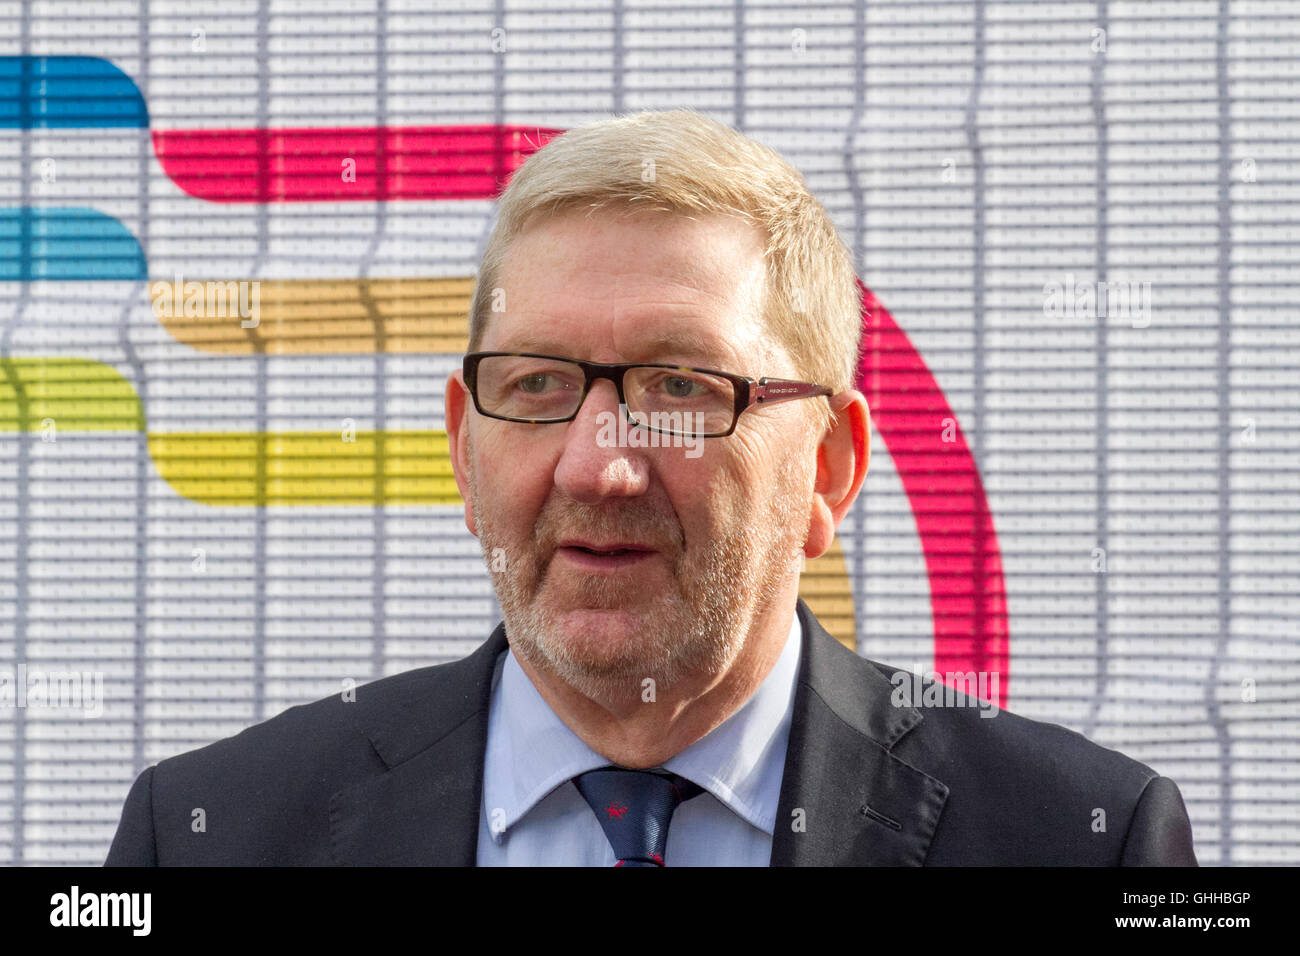 Liverpool, UK . 28th September, 2016. Final Day Labour Party Conference:  Leonard David 'Len' McCluskey is an English trade unionist who has been the General Secretary of Unite since 2011. He previously spent some years working on the Liverpool Docks prior to becoming a full-time union official.   Credit:  Cernan Elias/Alamy Live News Stock Photo